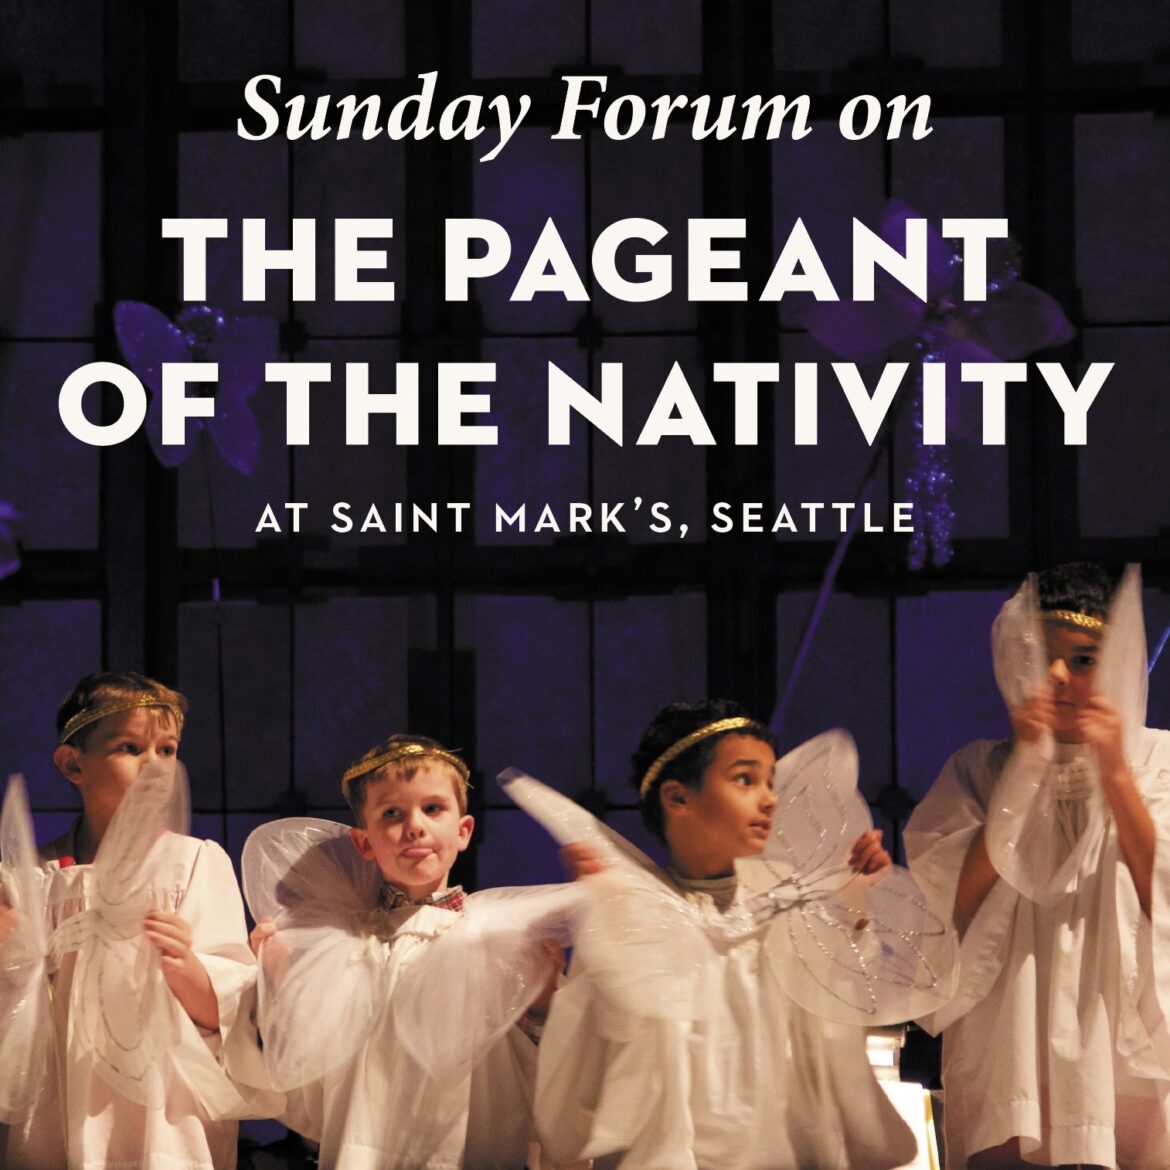 Sunday Forum on The Pageant of the Nativity